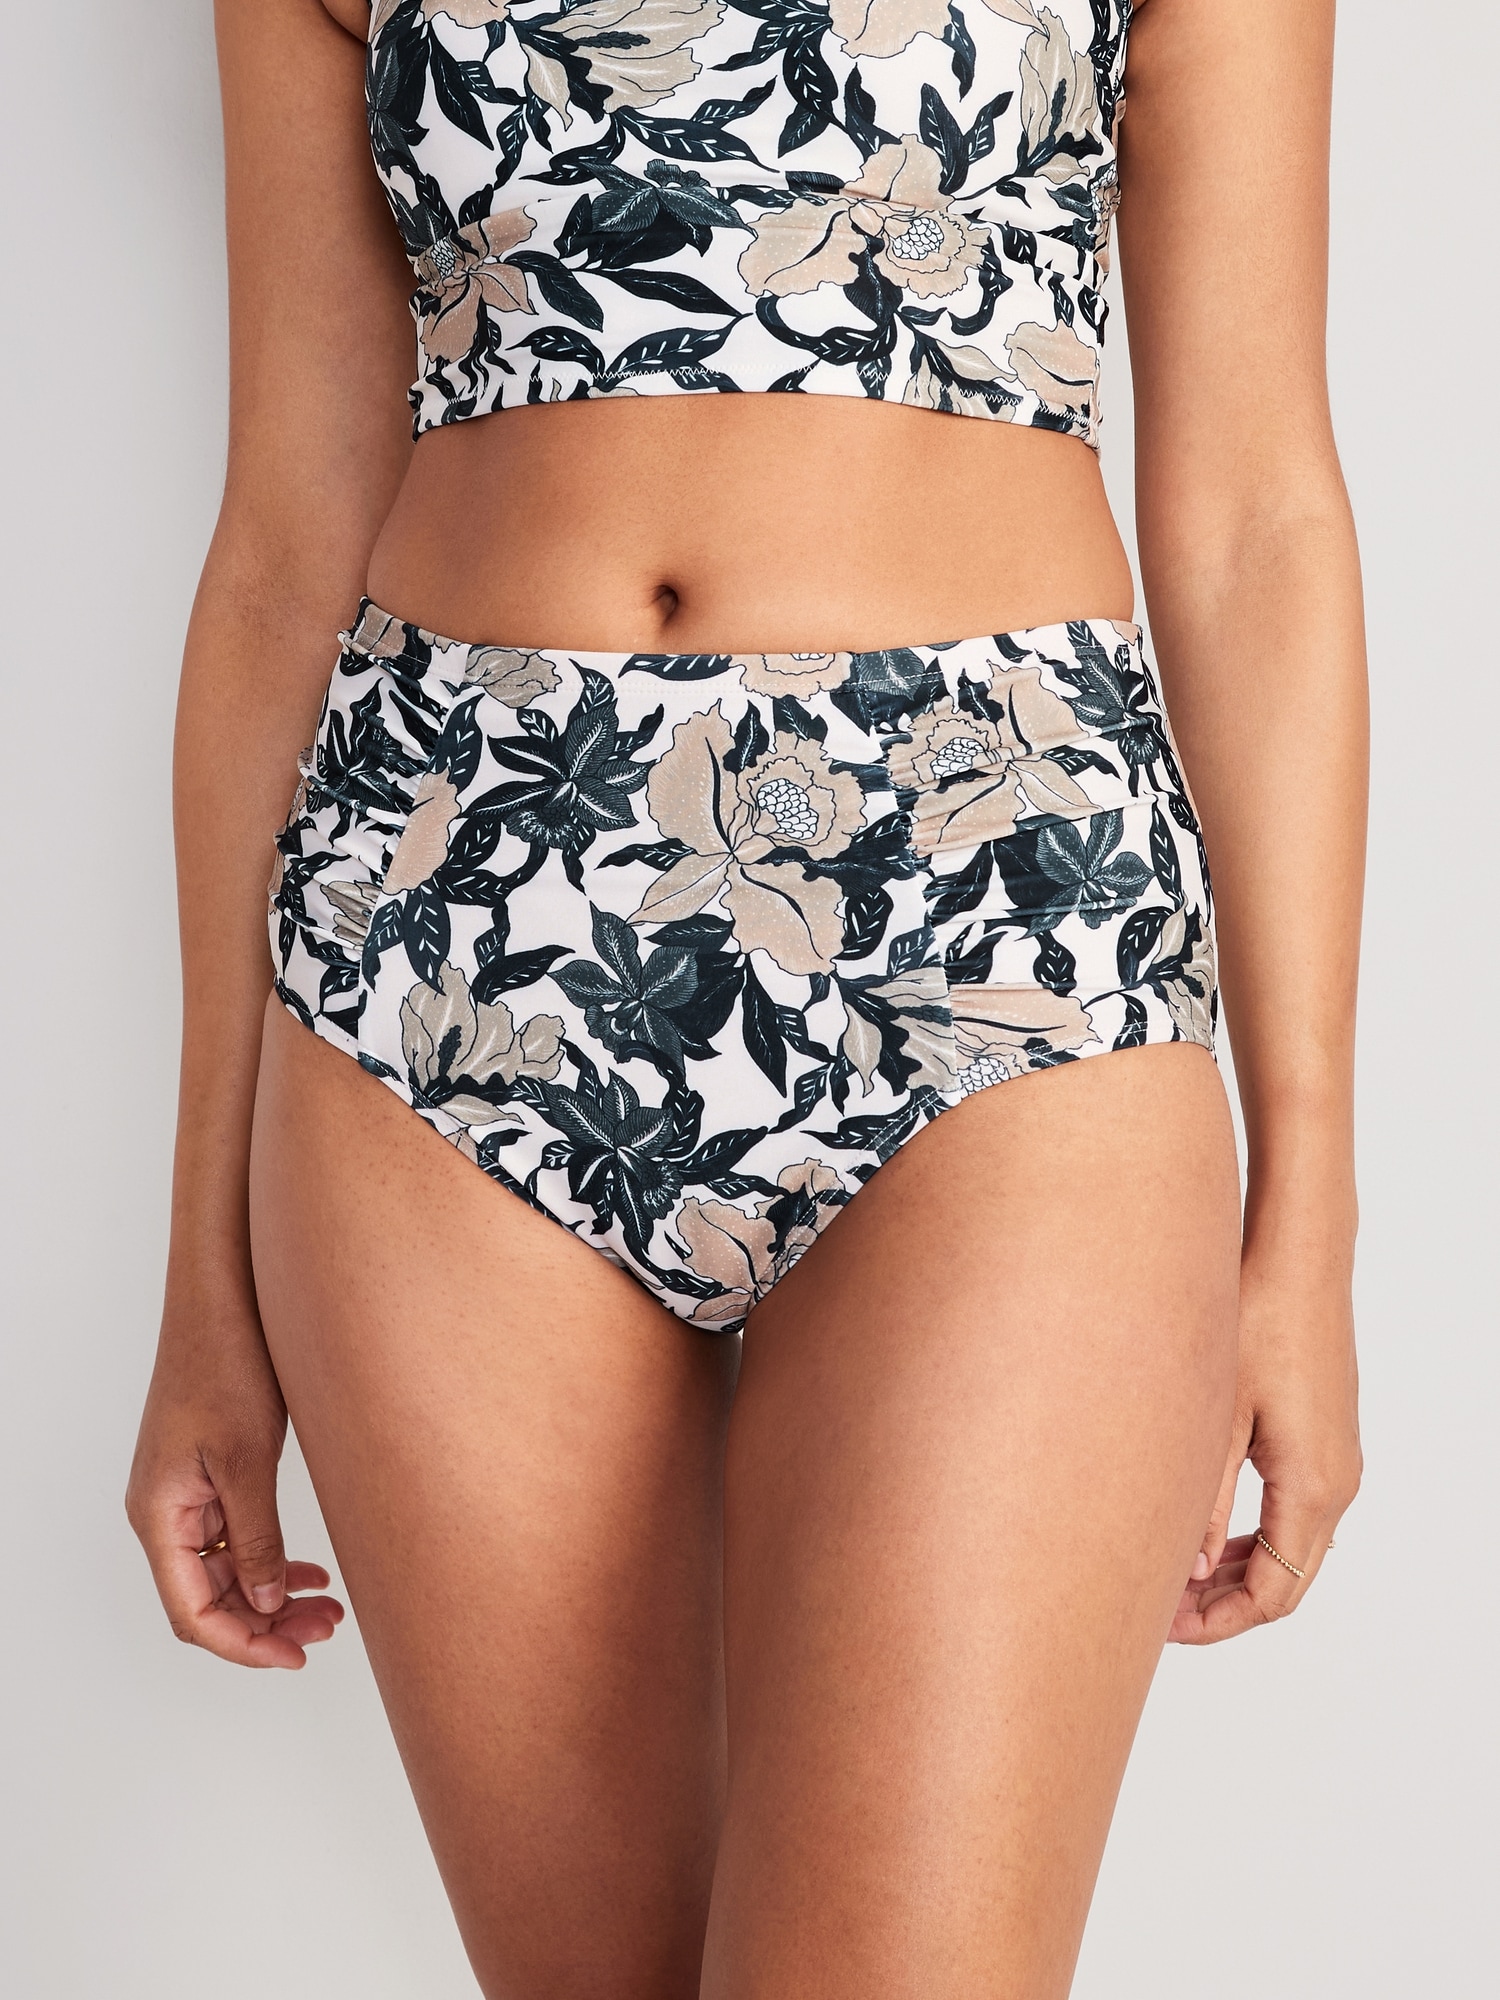 Old Navy High-Waisted Printed Ruched Bikini Swim Bottoms for Women black. 1